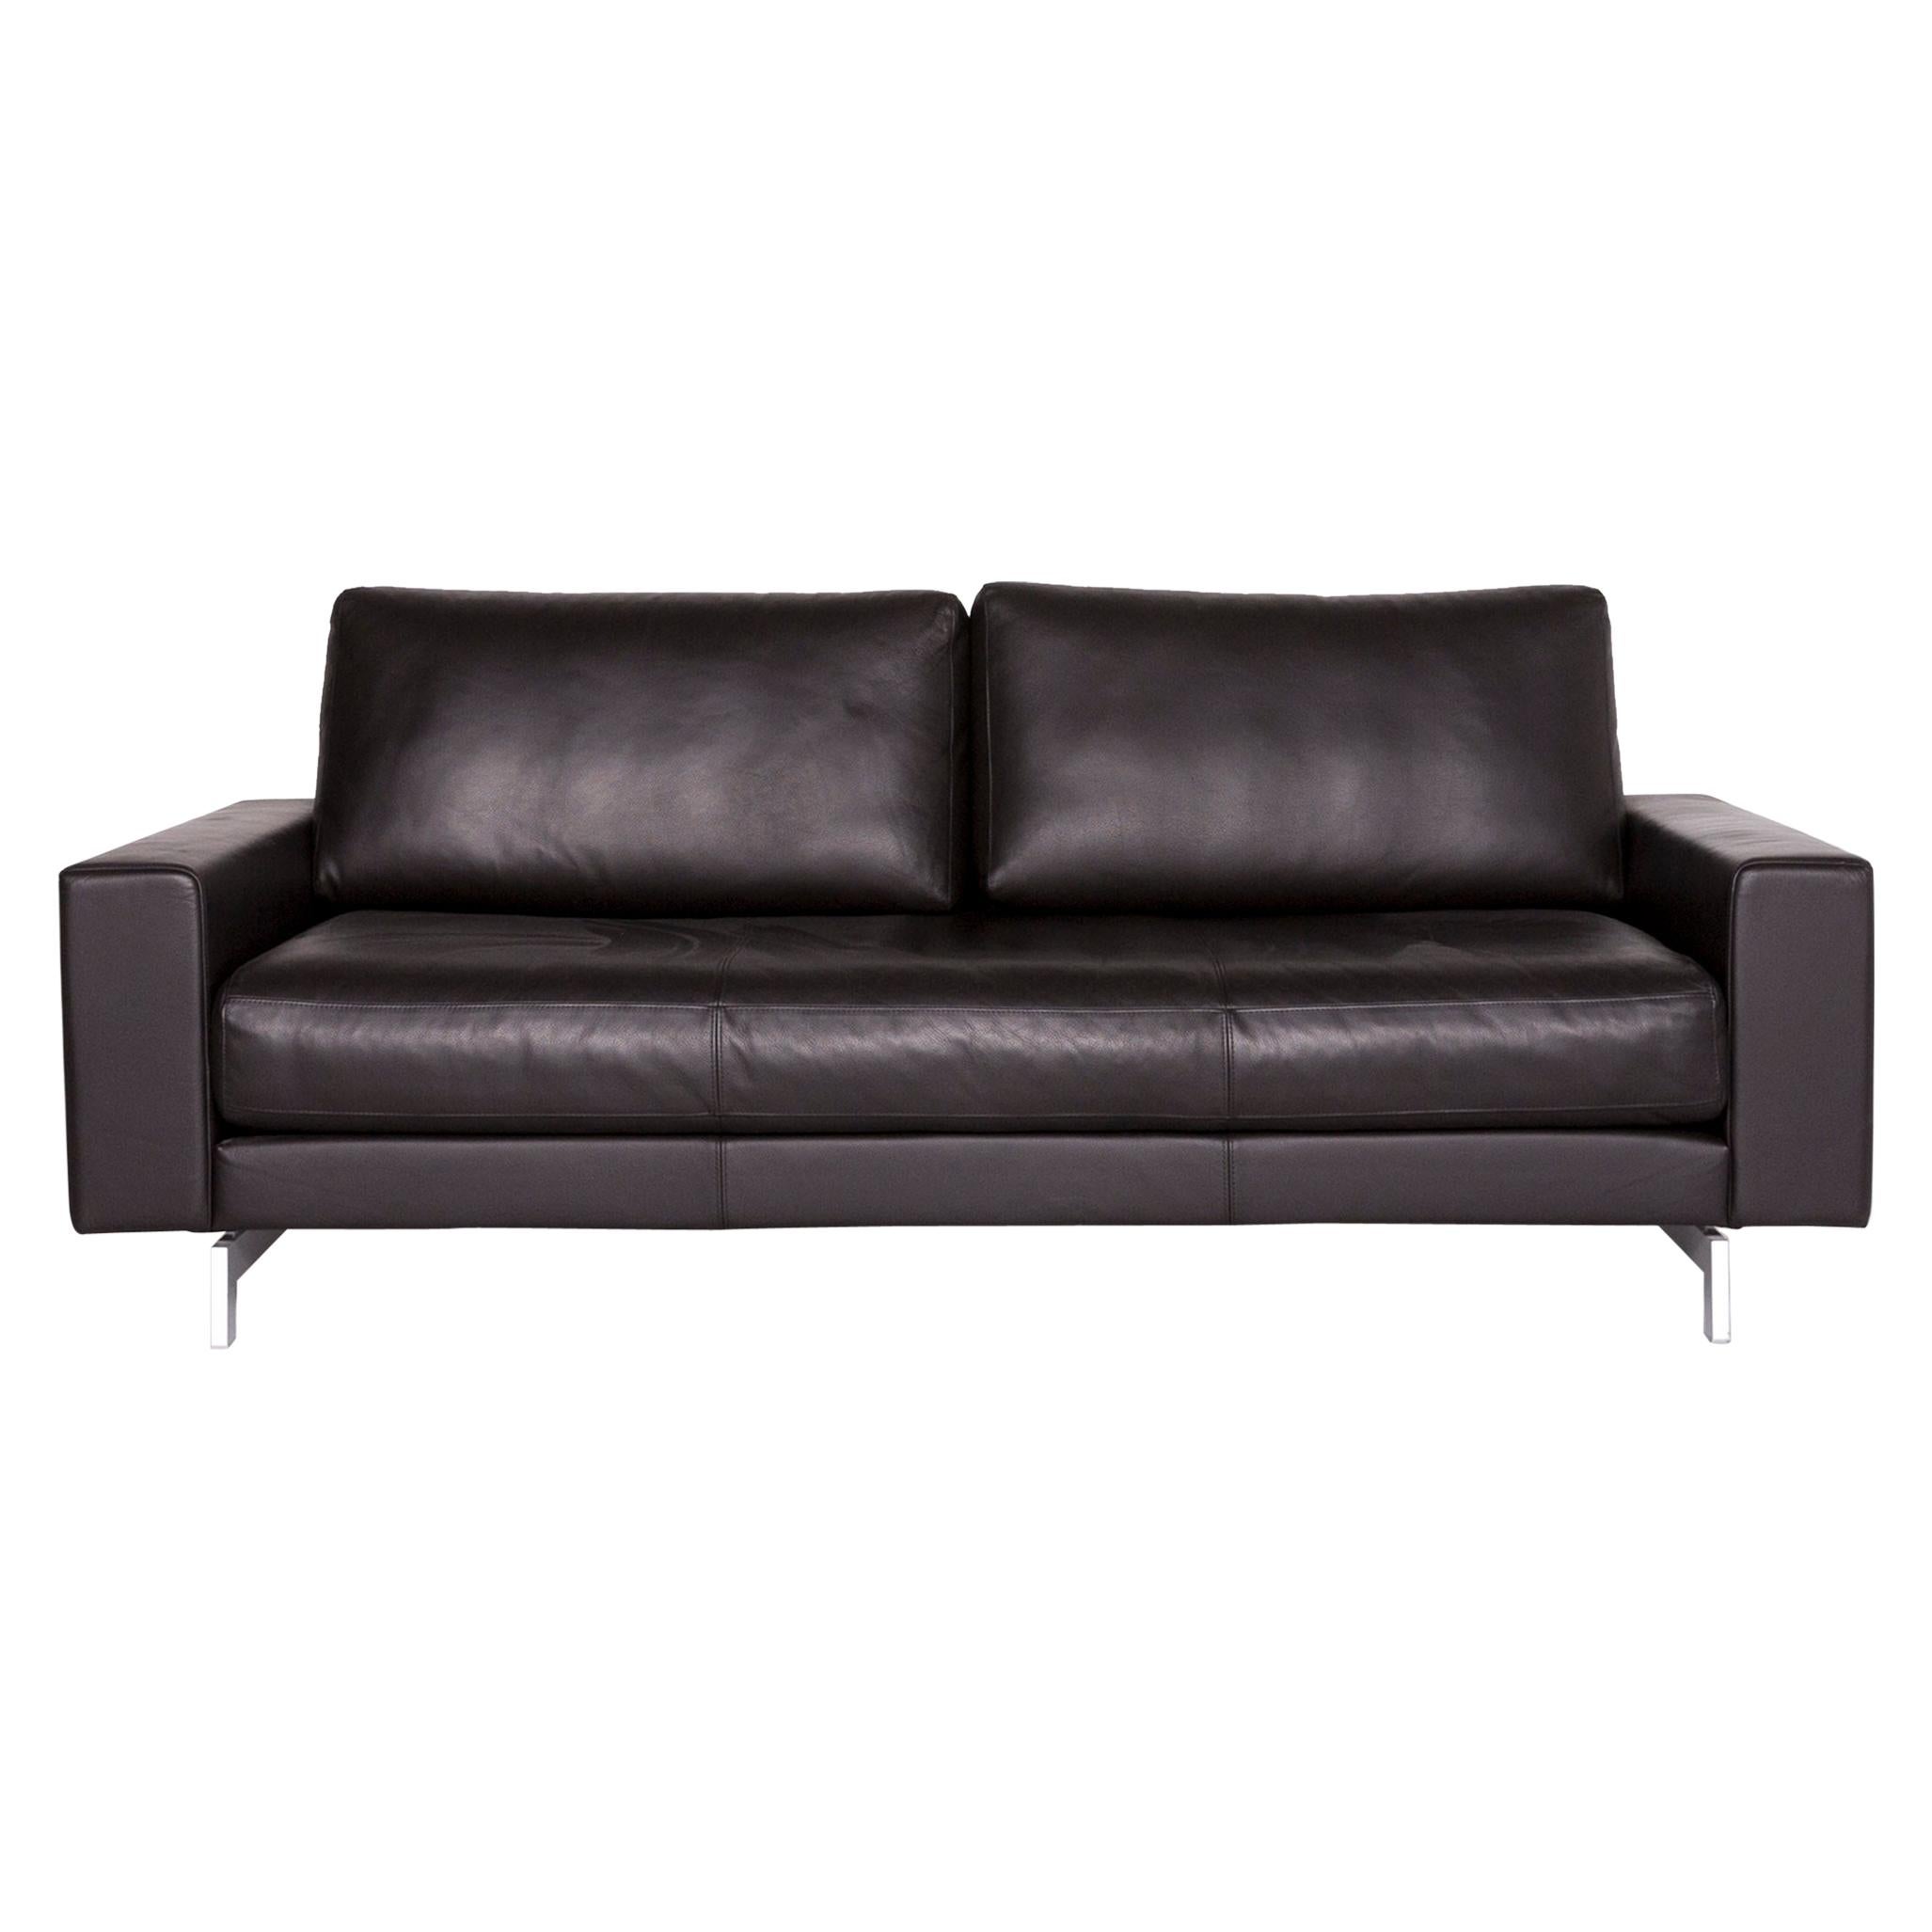 Rolf Benz Vida Designer Leather Sofa Brown Two-Seat Couch